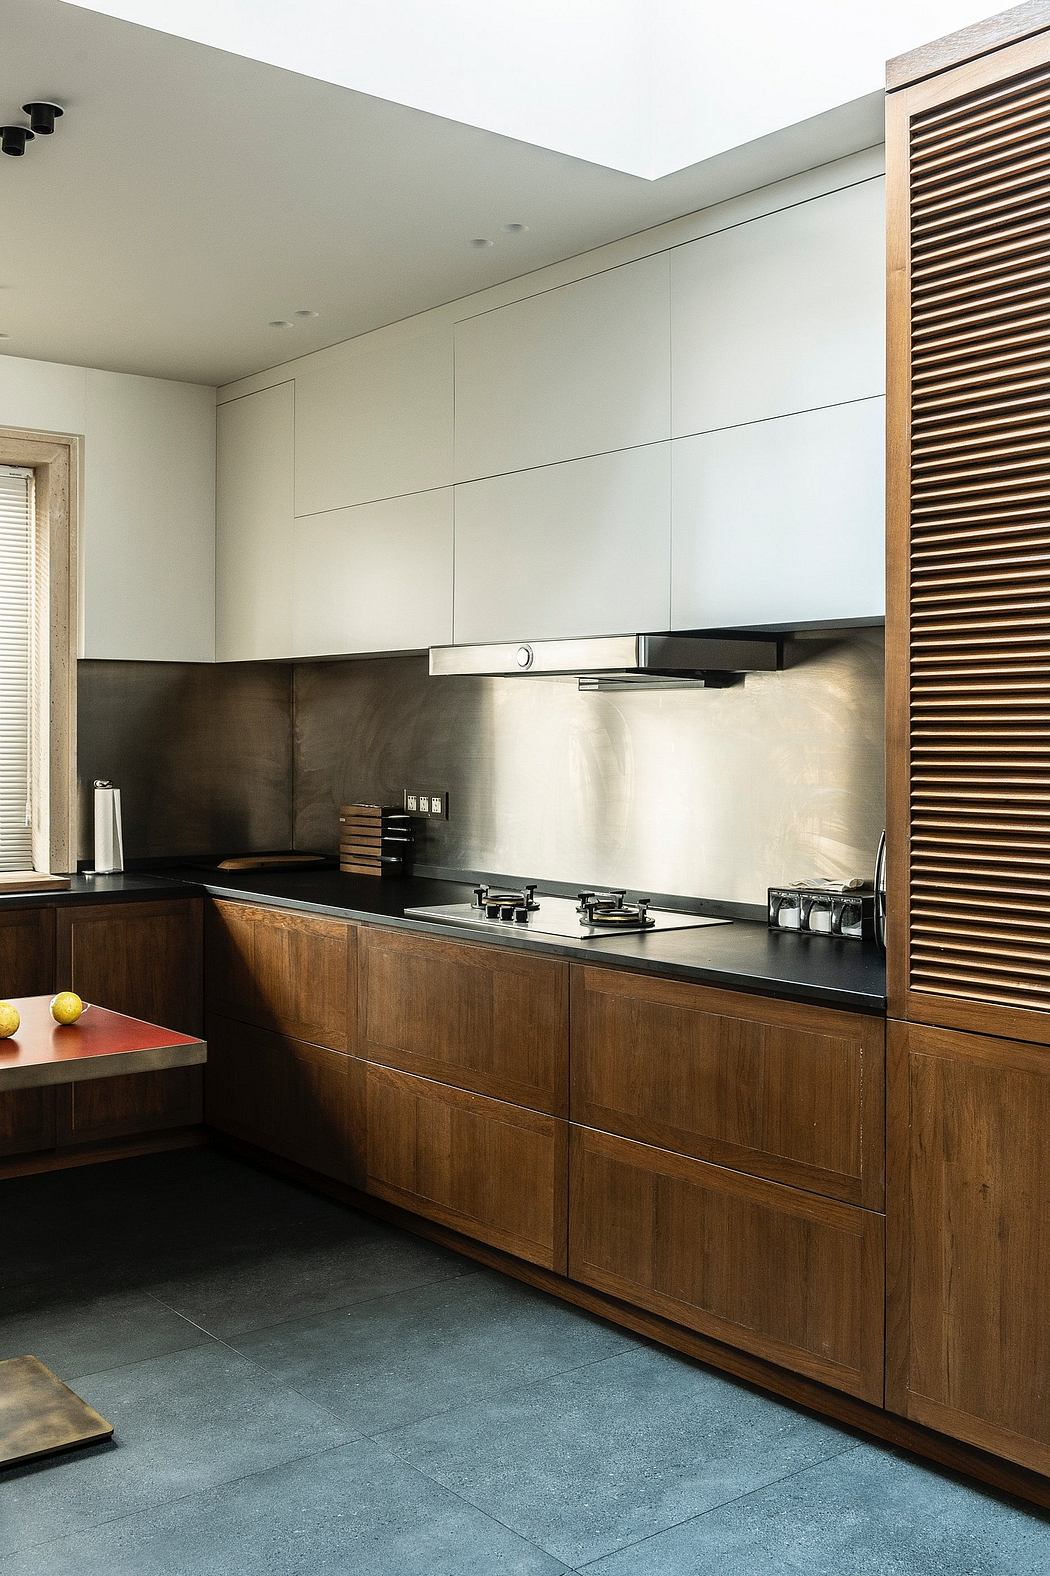 Contemporary kitchen with wooden cabinetry and stainless steel backsplash.